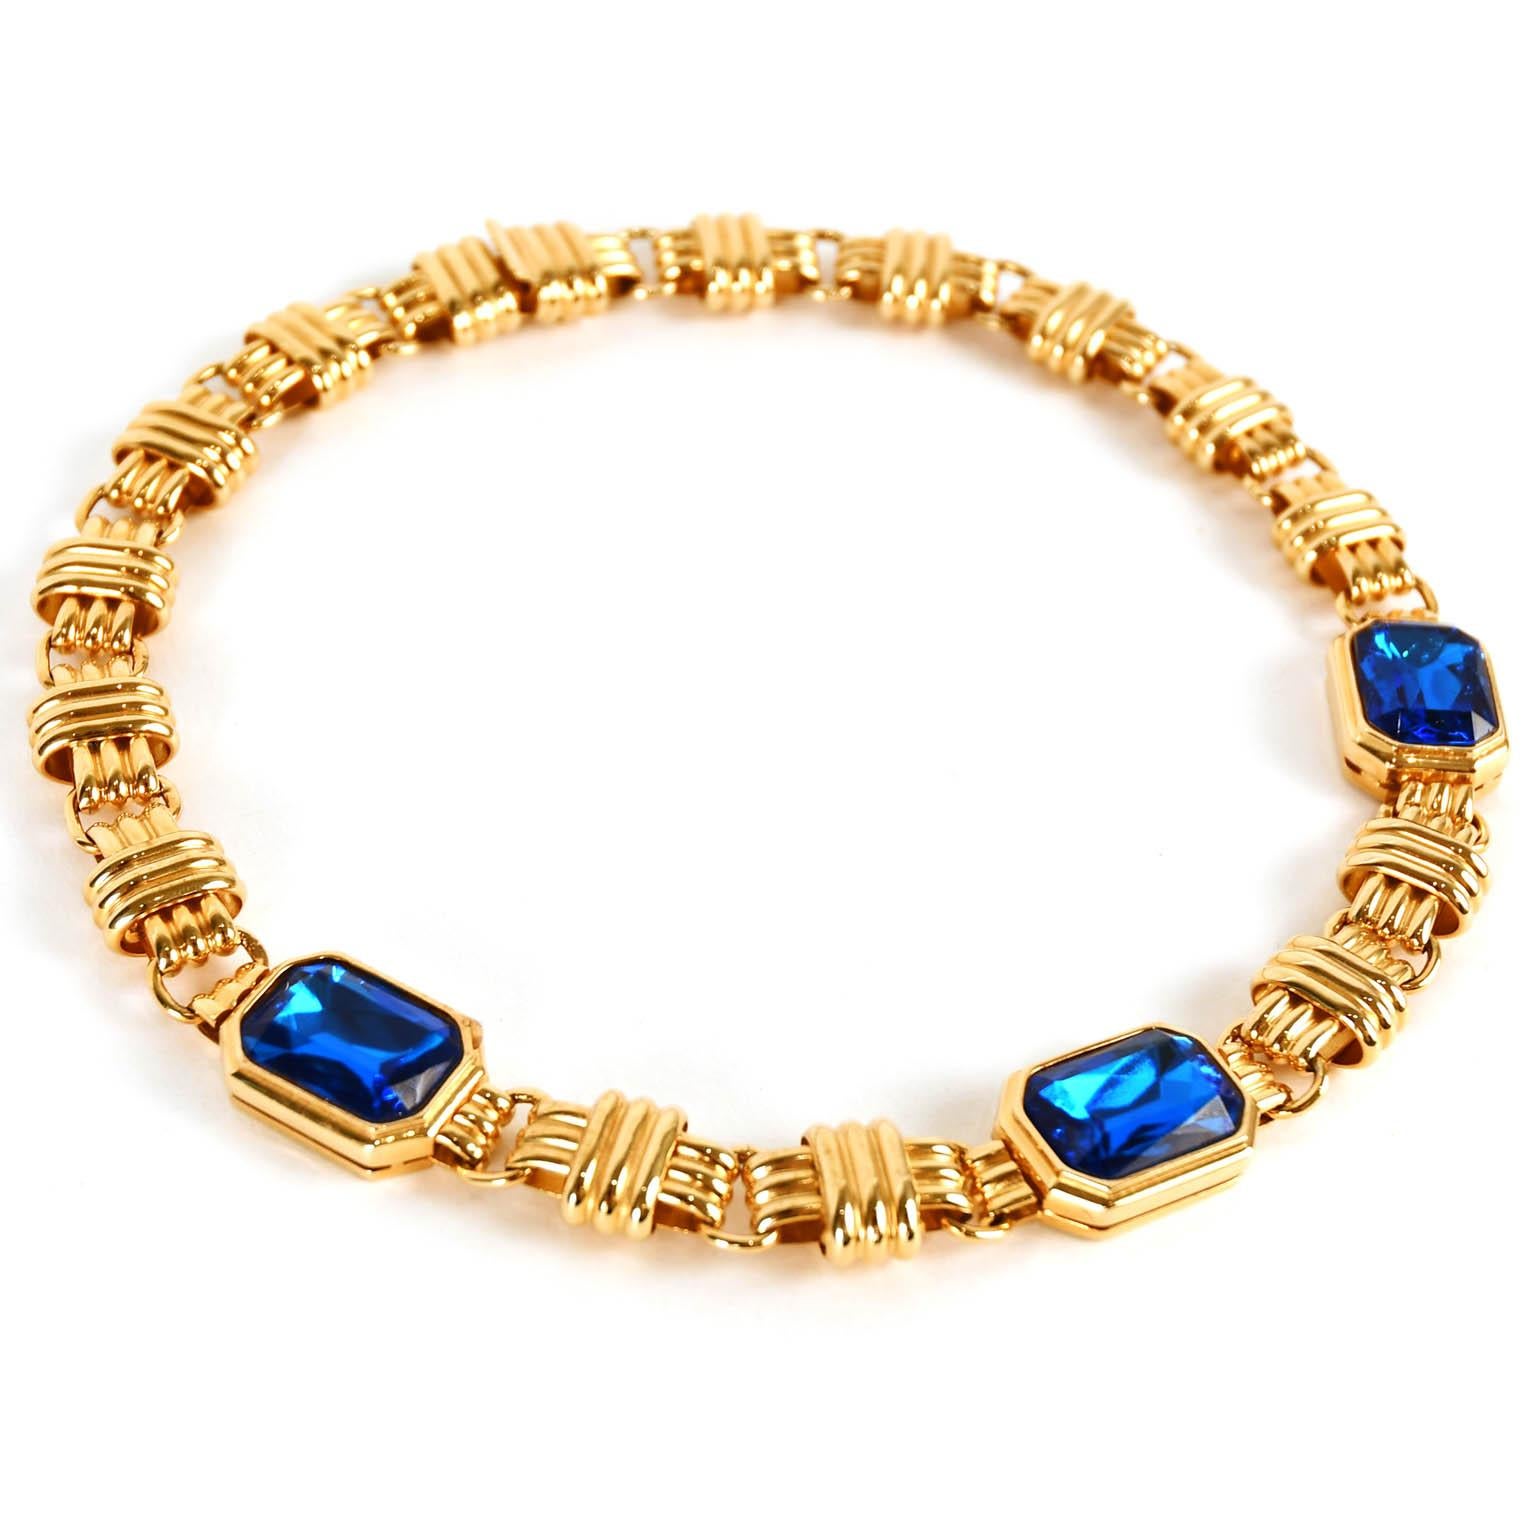 A marvelous necklace from 1970-1980 designed by company Bijoux Cascio.

1948 Gaetana Cascio founded the company and since then all pieces were produced directly in Florence
Riccardo Cascio joined his father Gaetano's company in the 1960s.
Since